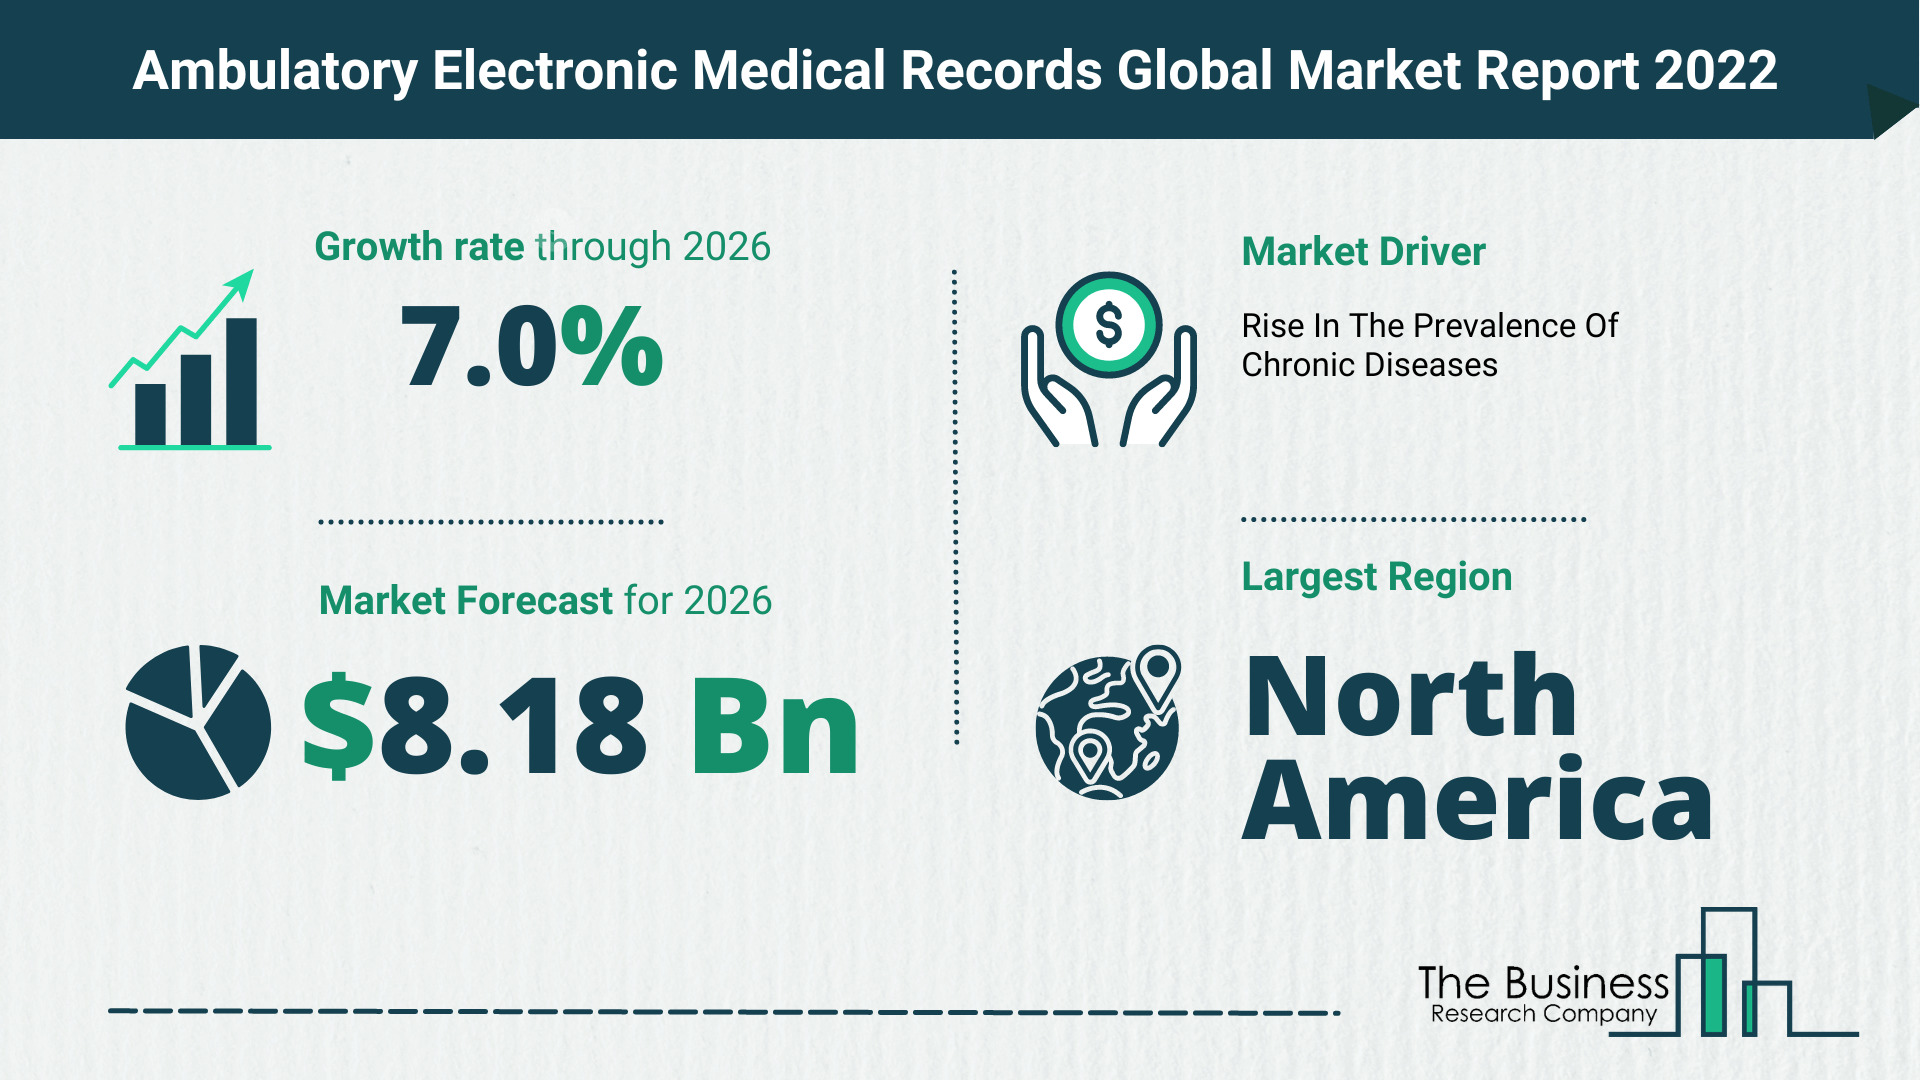 How Will The Ambulatory Electronic Medical Records Market Grow In 2022?